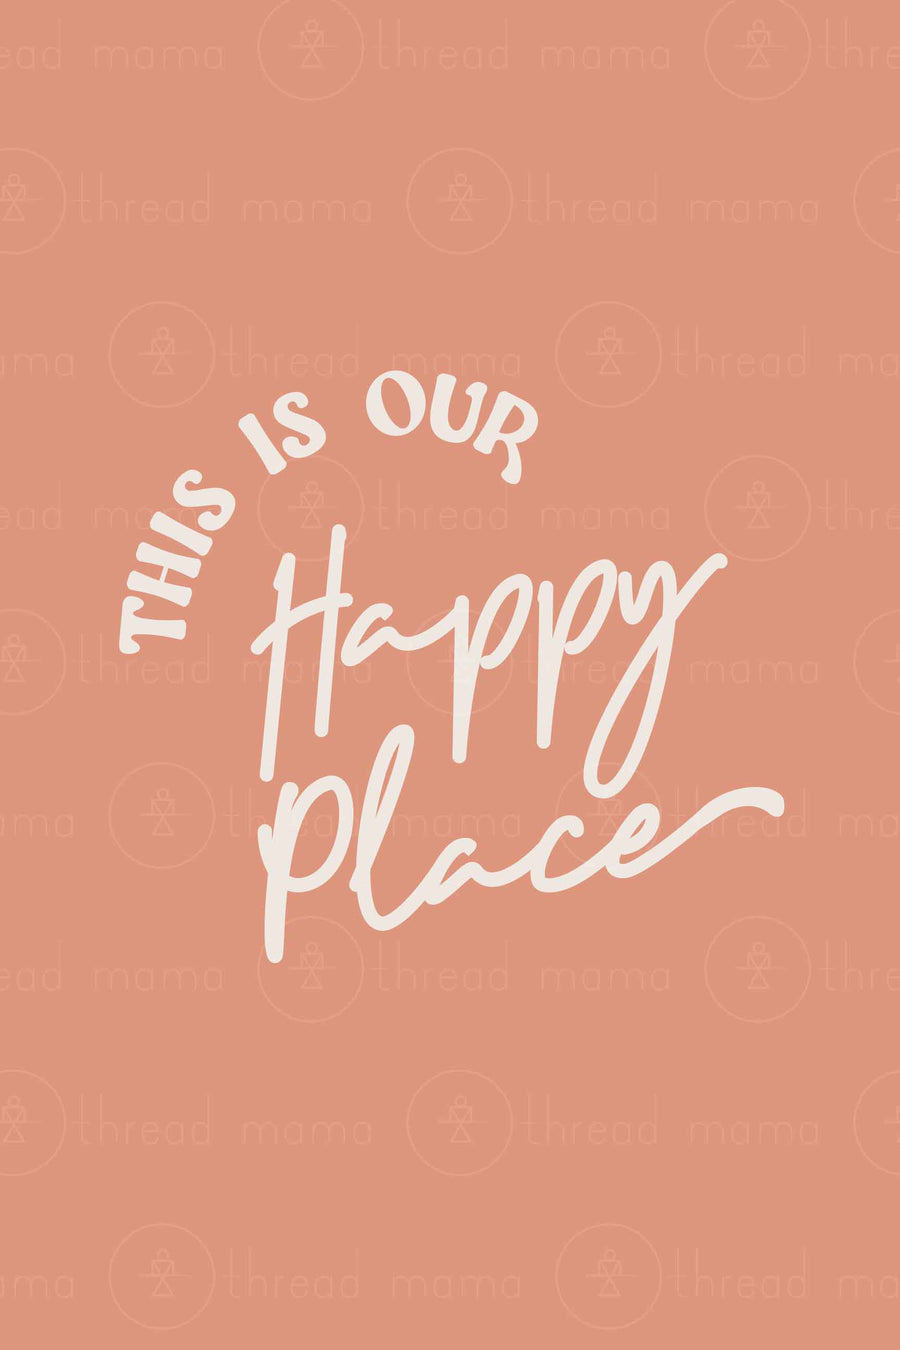 This is Our Happy Place (Option 2)